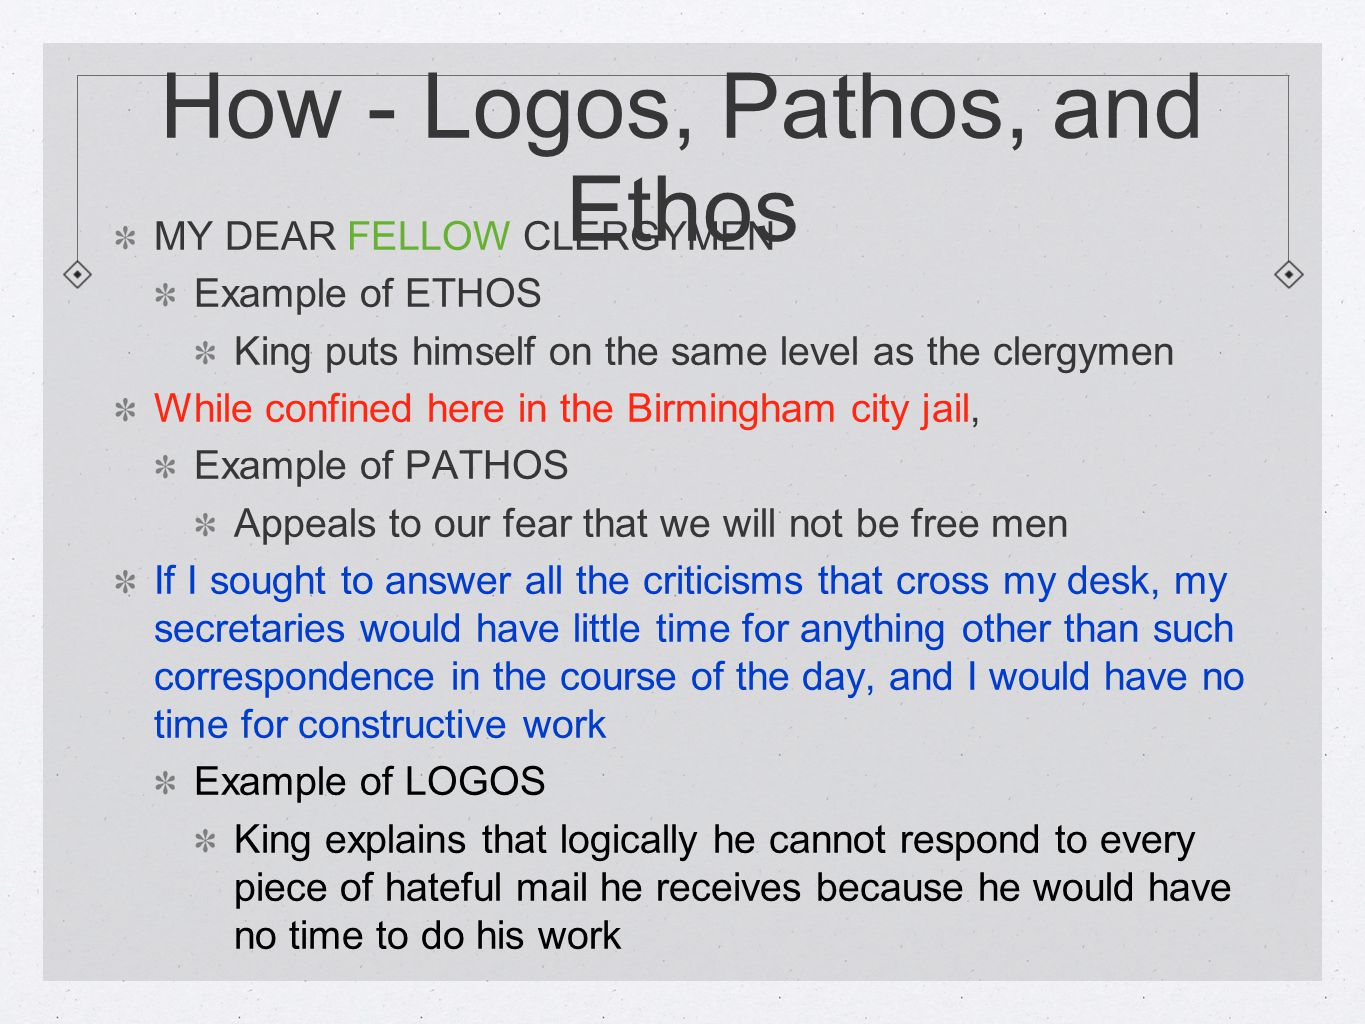 How - Logos, Pathos, and Ethos MY DEAR FELLOW CLERGYMEN Example of ETHOS King puts himself on the same level as the clergymen While confined here in the Birmingham city jail, Example of PATHOS Appeals to our fear that we will not be free men If I sought to answer all the criticisms that cross my desk, my secretaries would have little time for anything other than such correspondence in the course of the day, and I would have no time for constructive work Example of LOGOS King explains that logically he cannot respond to every piece of hateful mail he receives because he would have no time to do his work